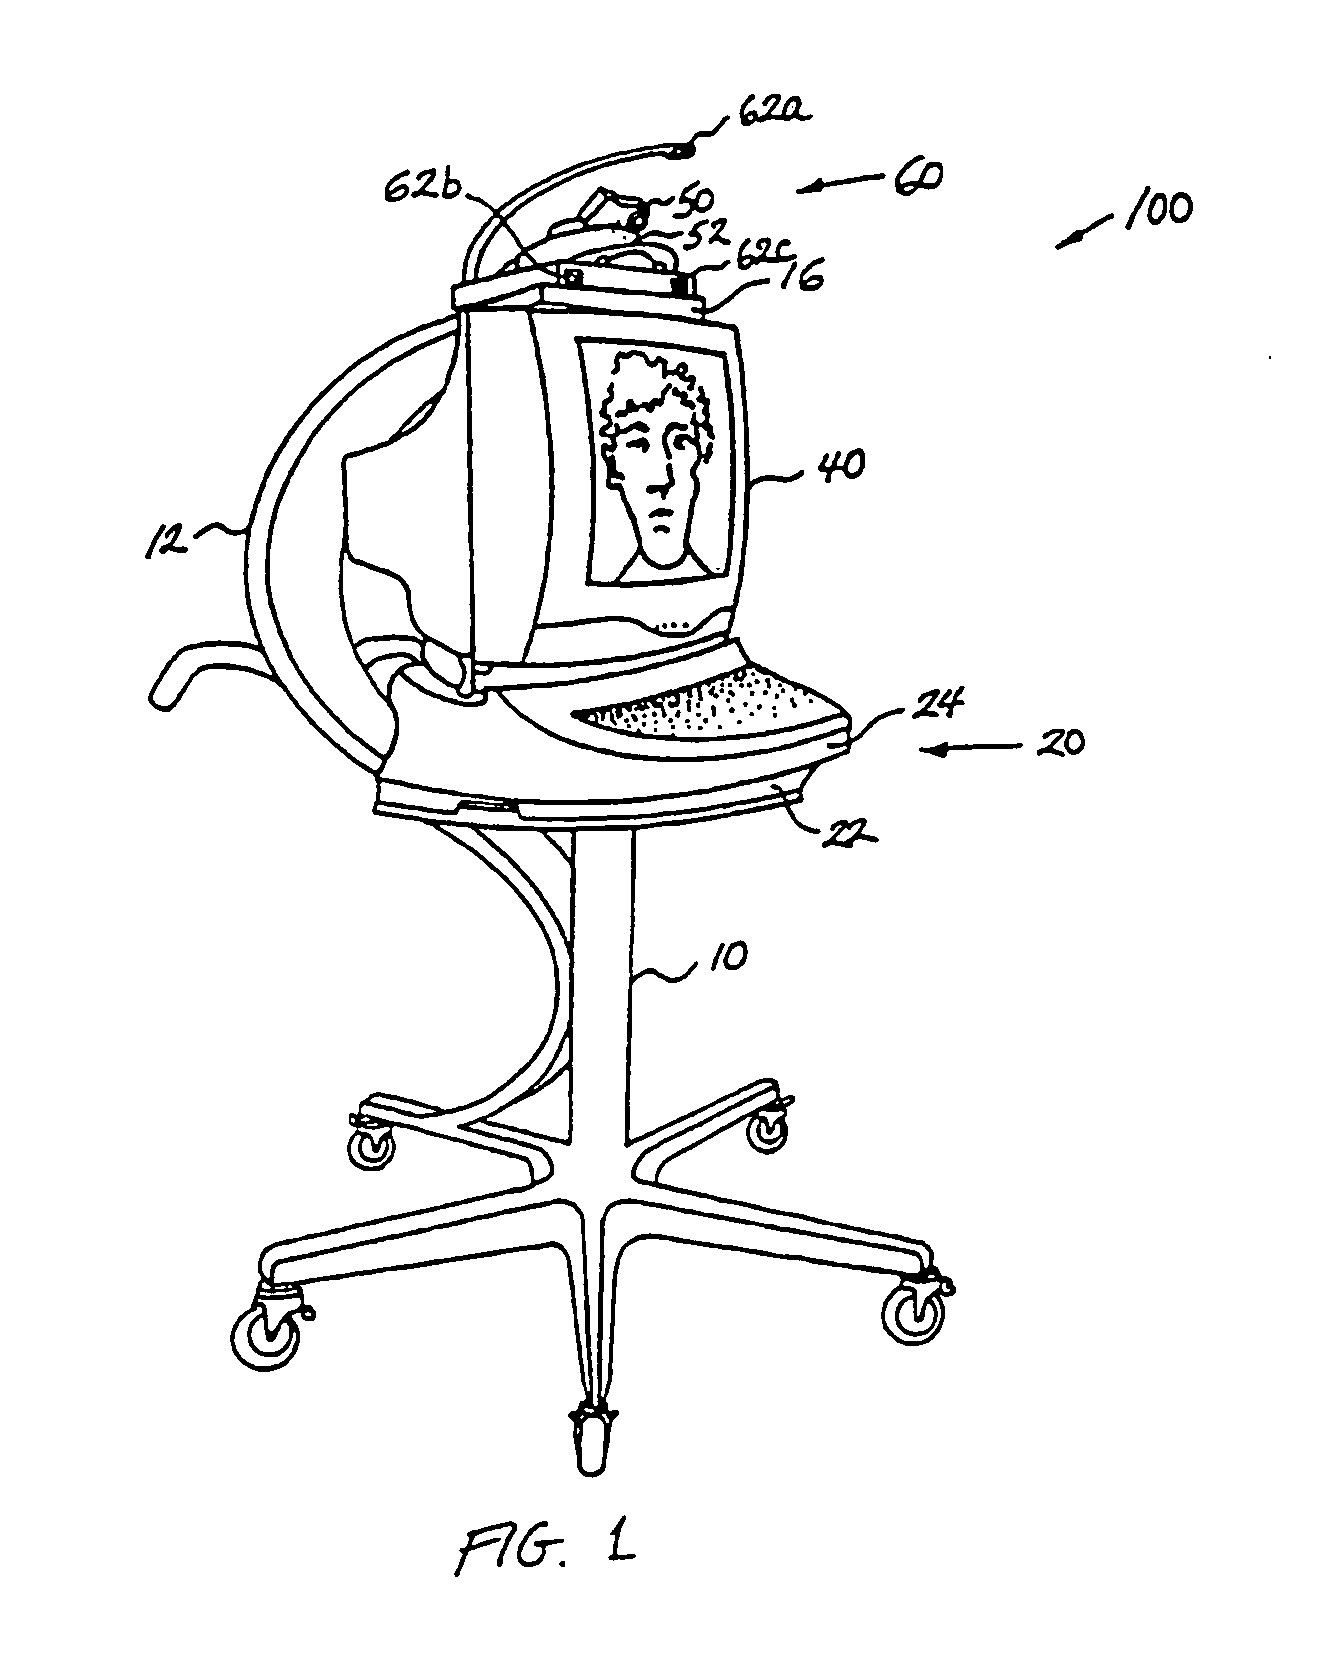 Teleconferencing robot with swiveling video monitor